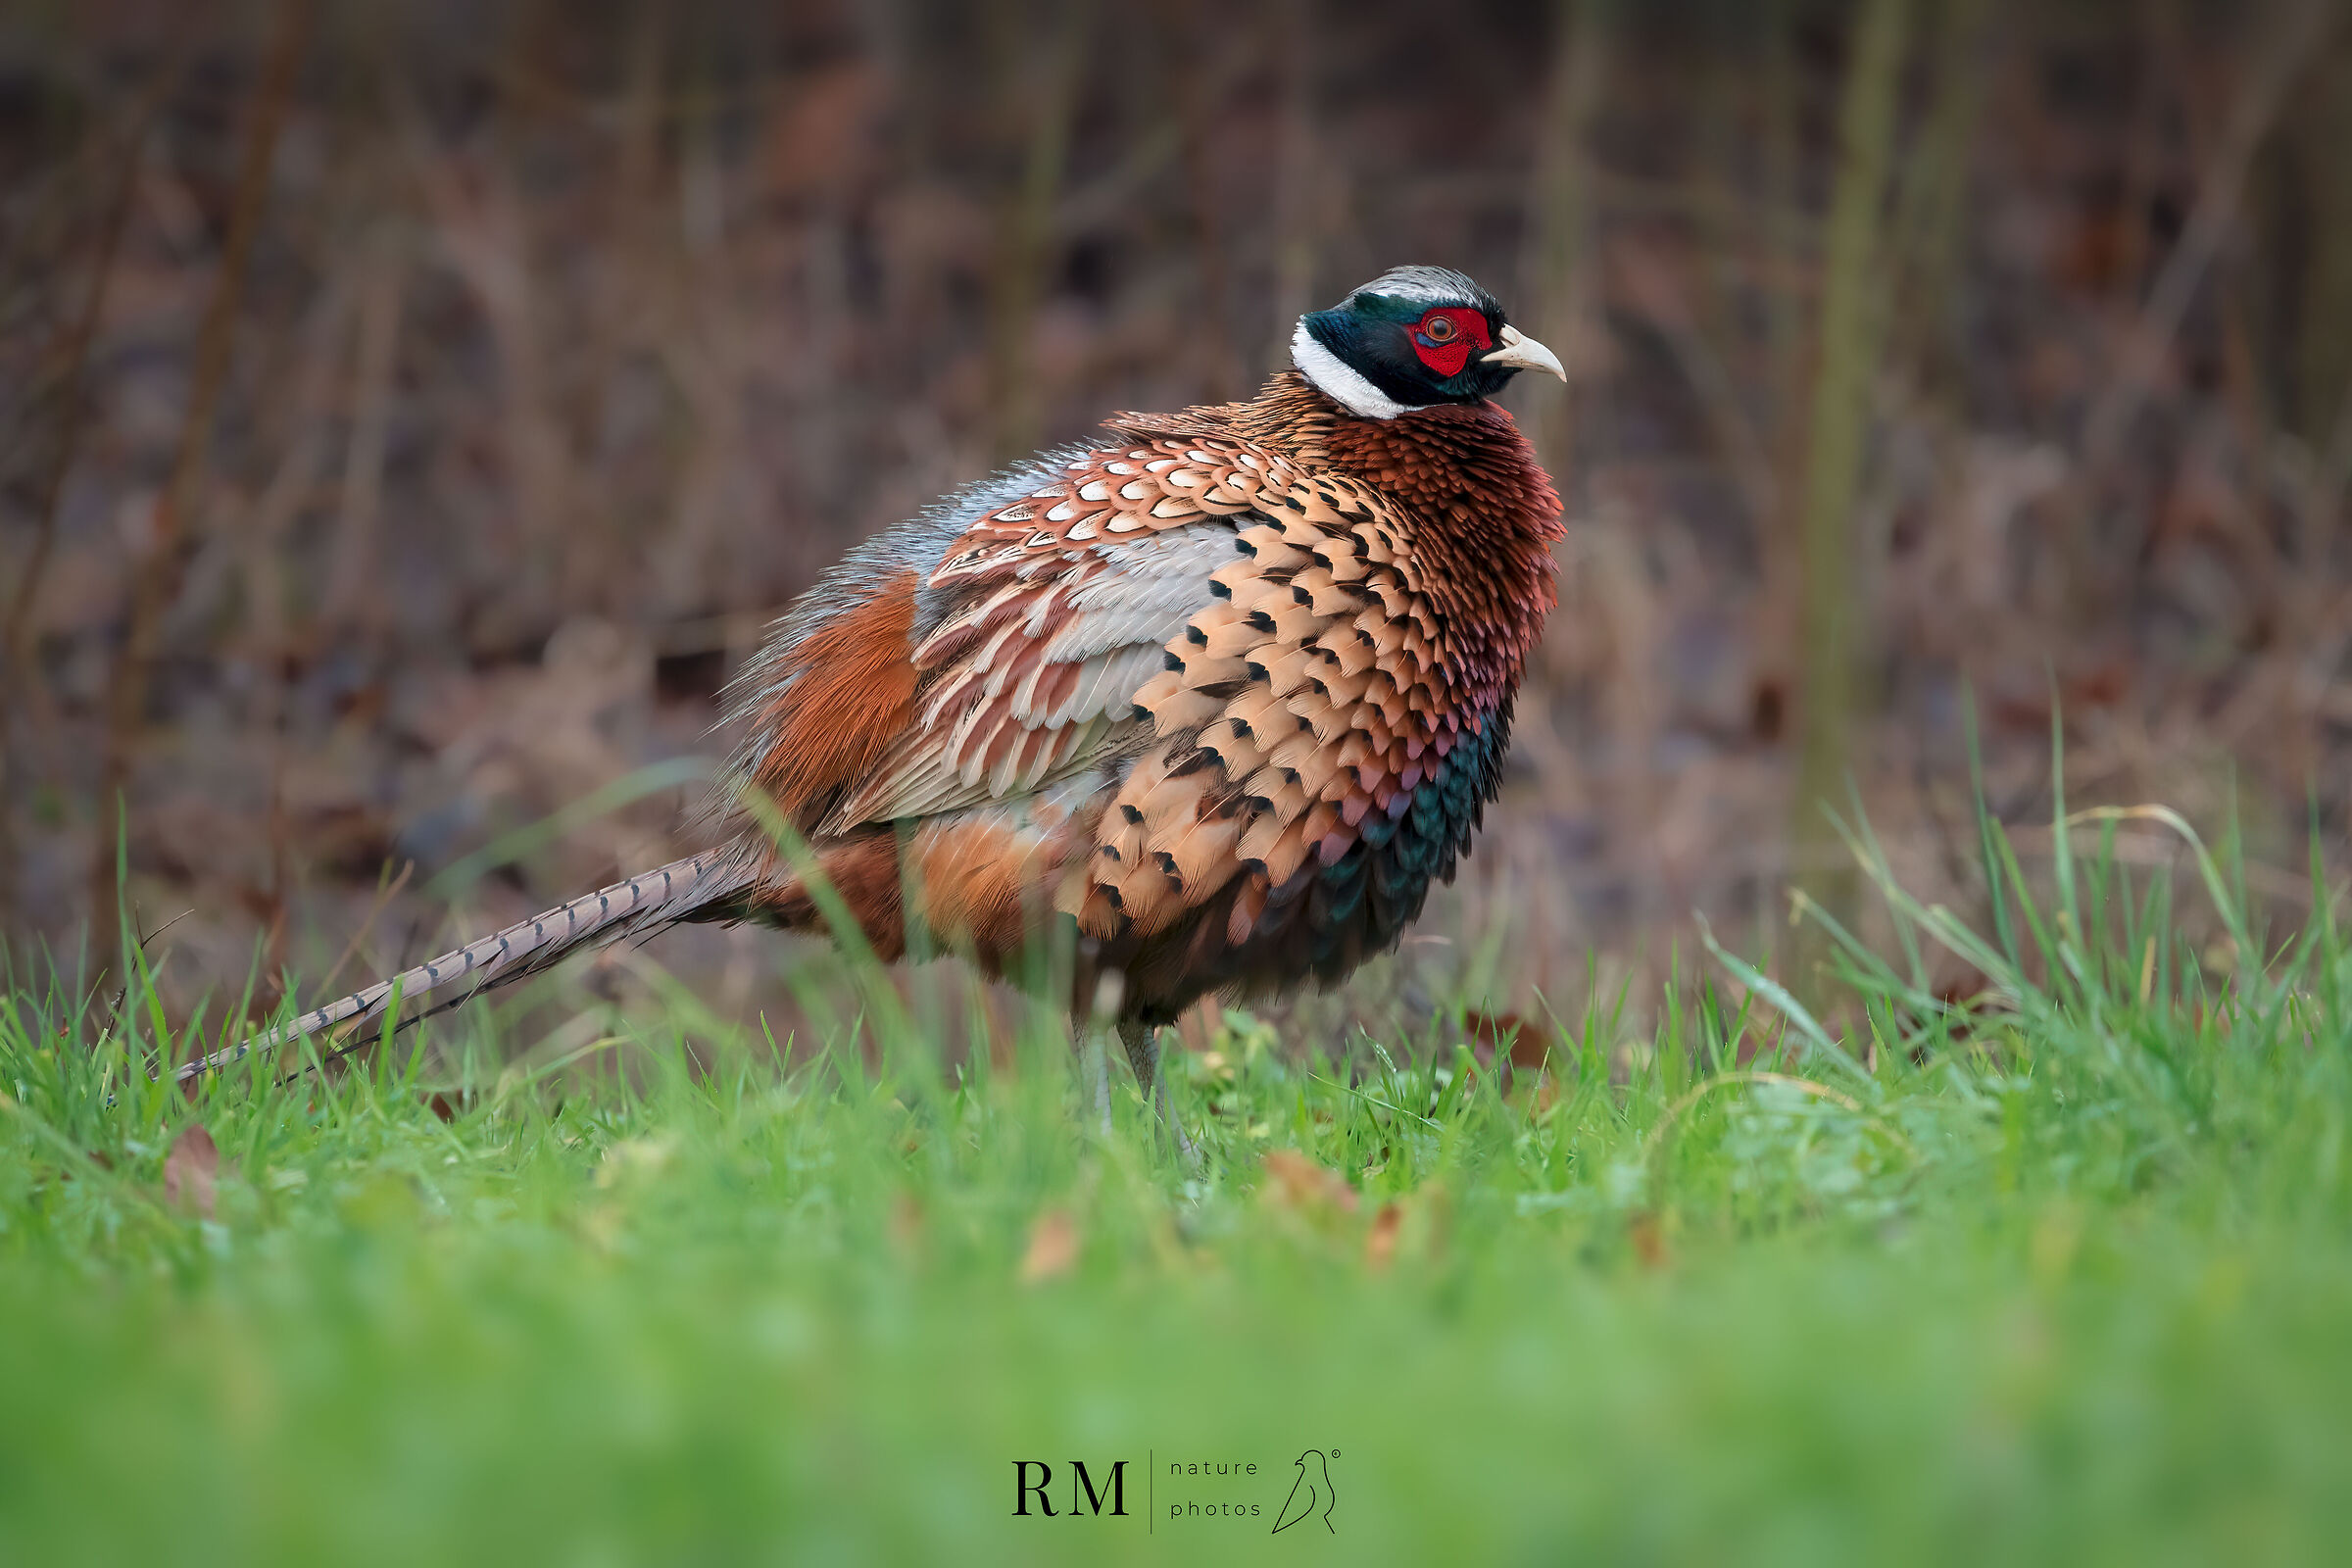 It's just a pheasant......